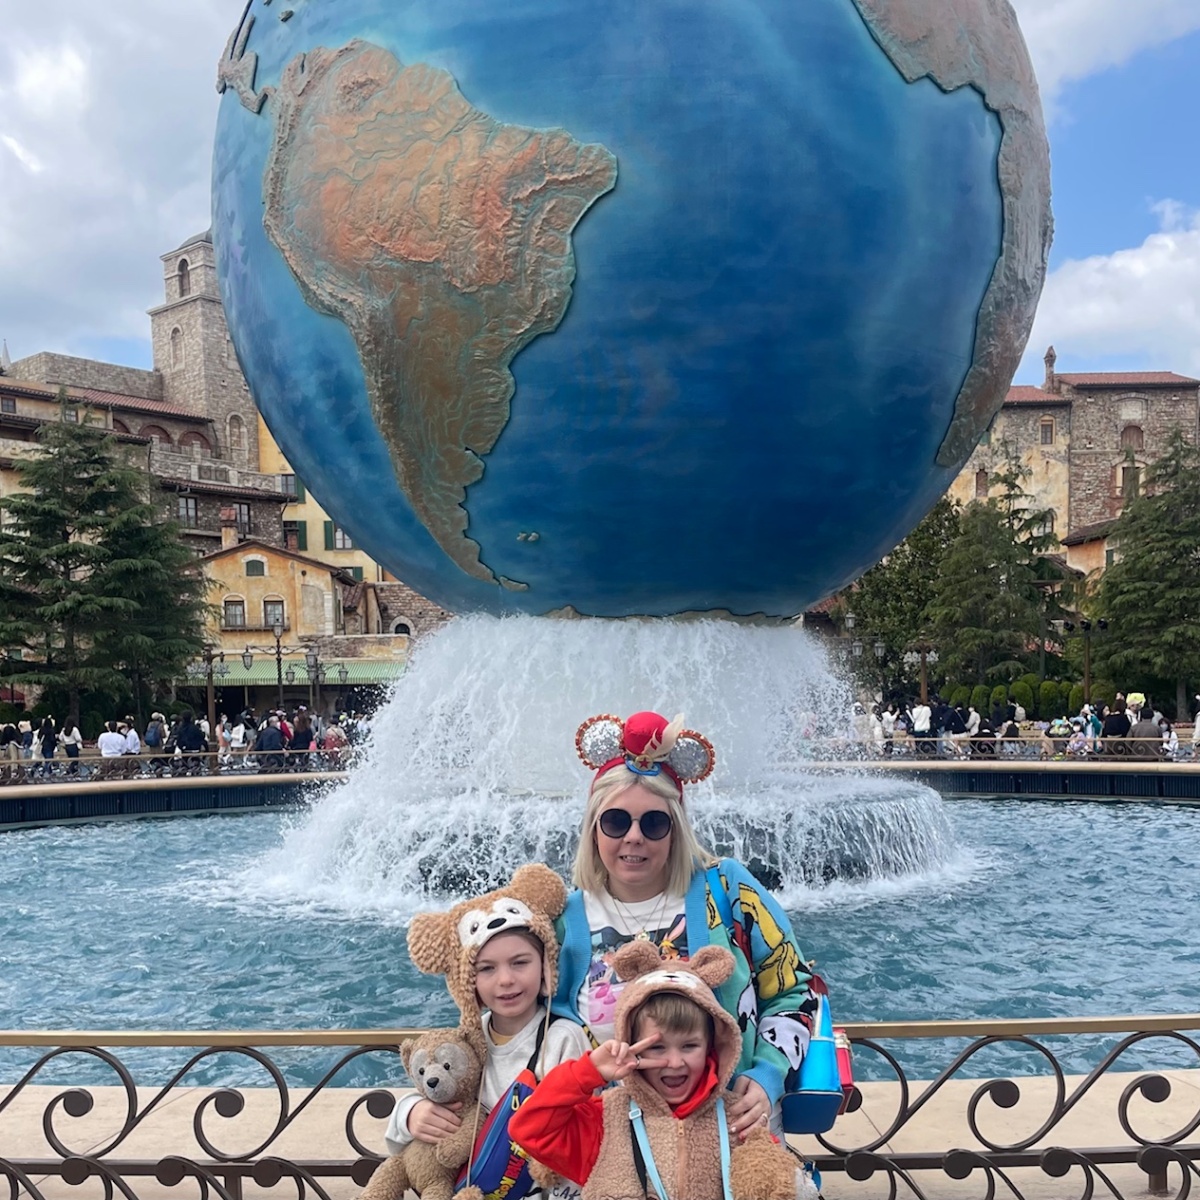 Japan With Kids: Why Tokyo Disney Sea Is The Best Theme Park In The World